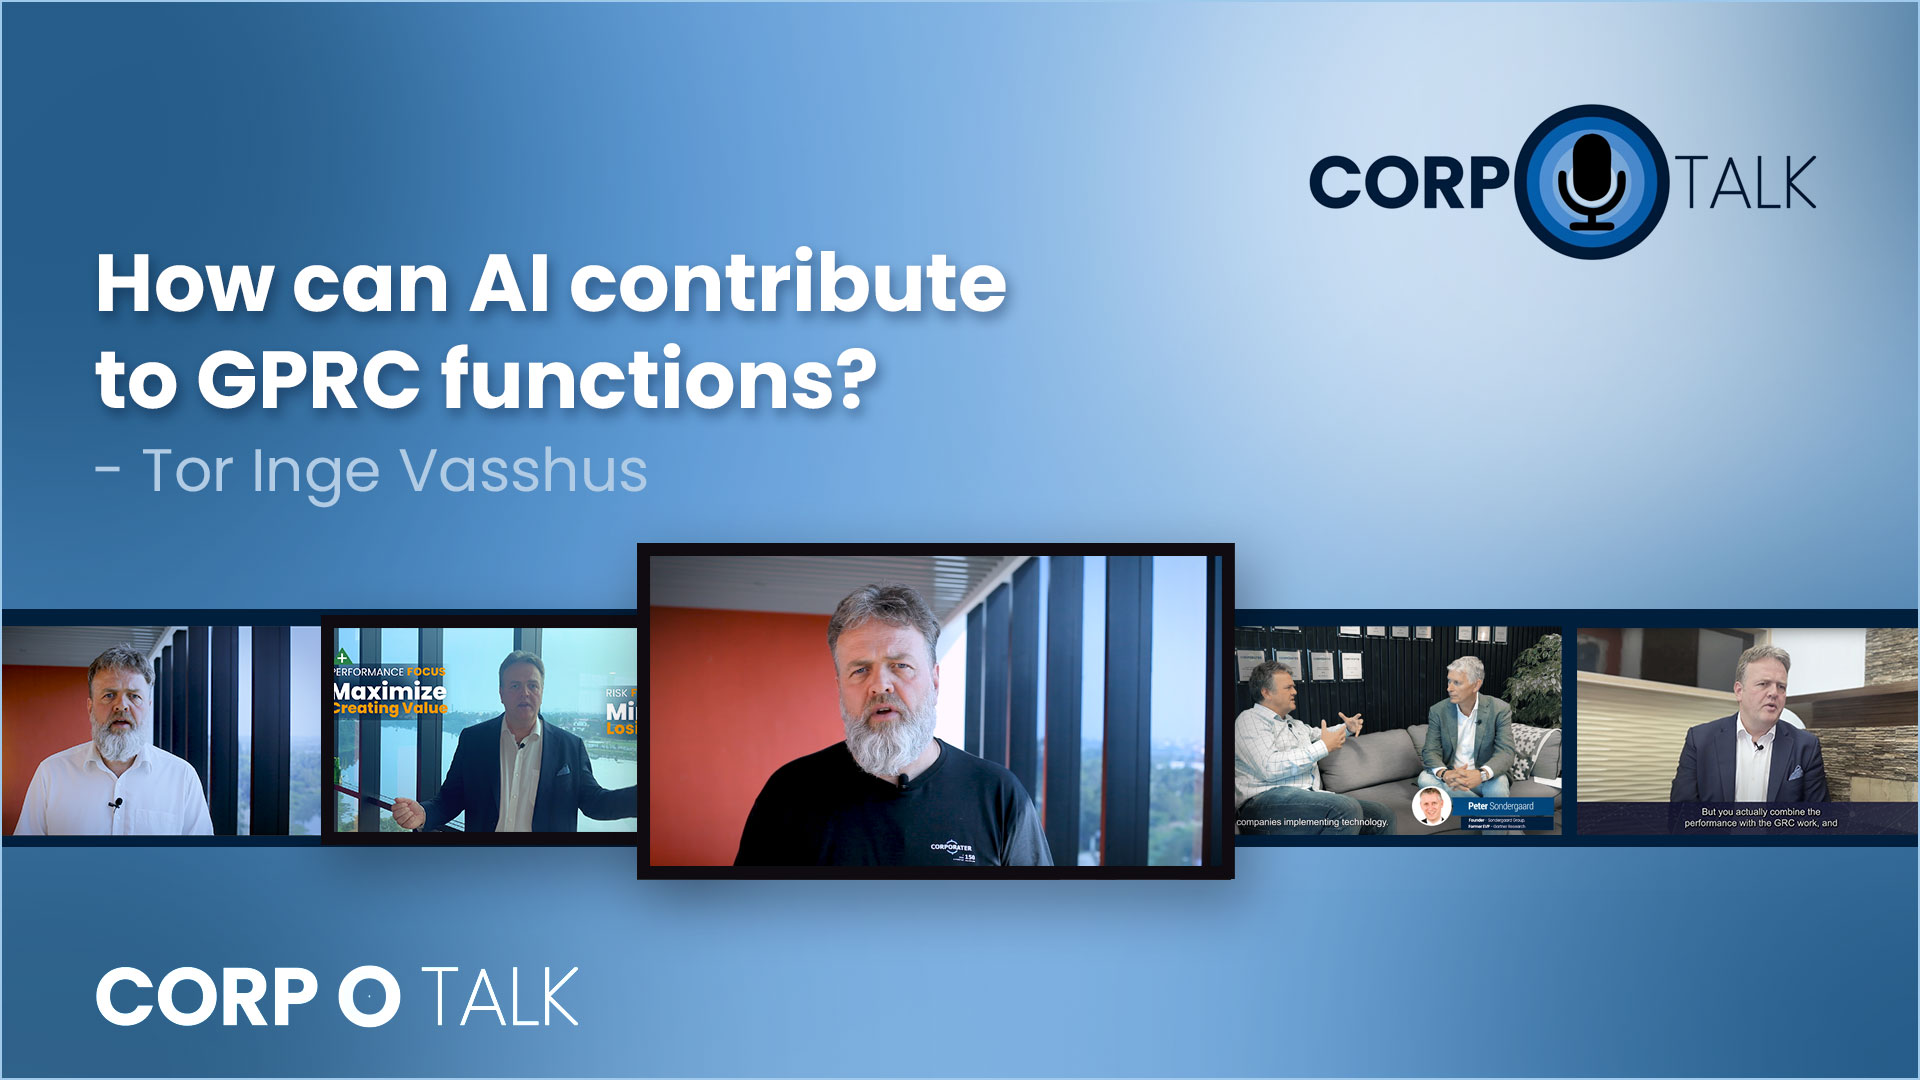 Corp-O-Talk, Episode 9 - How can AI contribute to GPRC functions